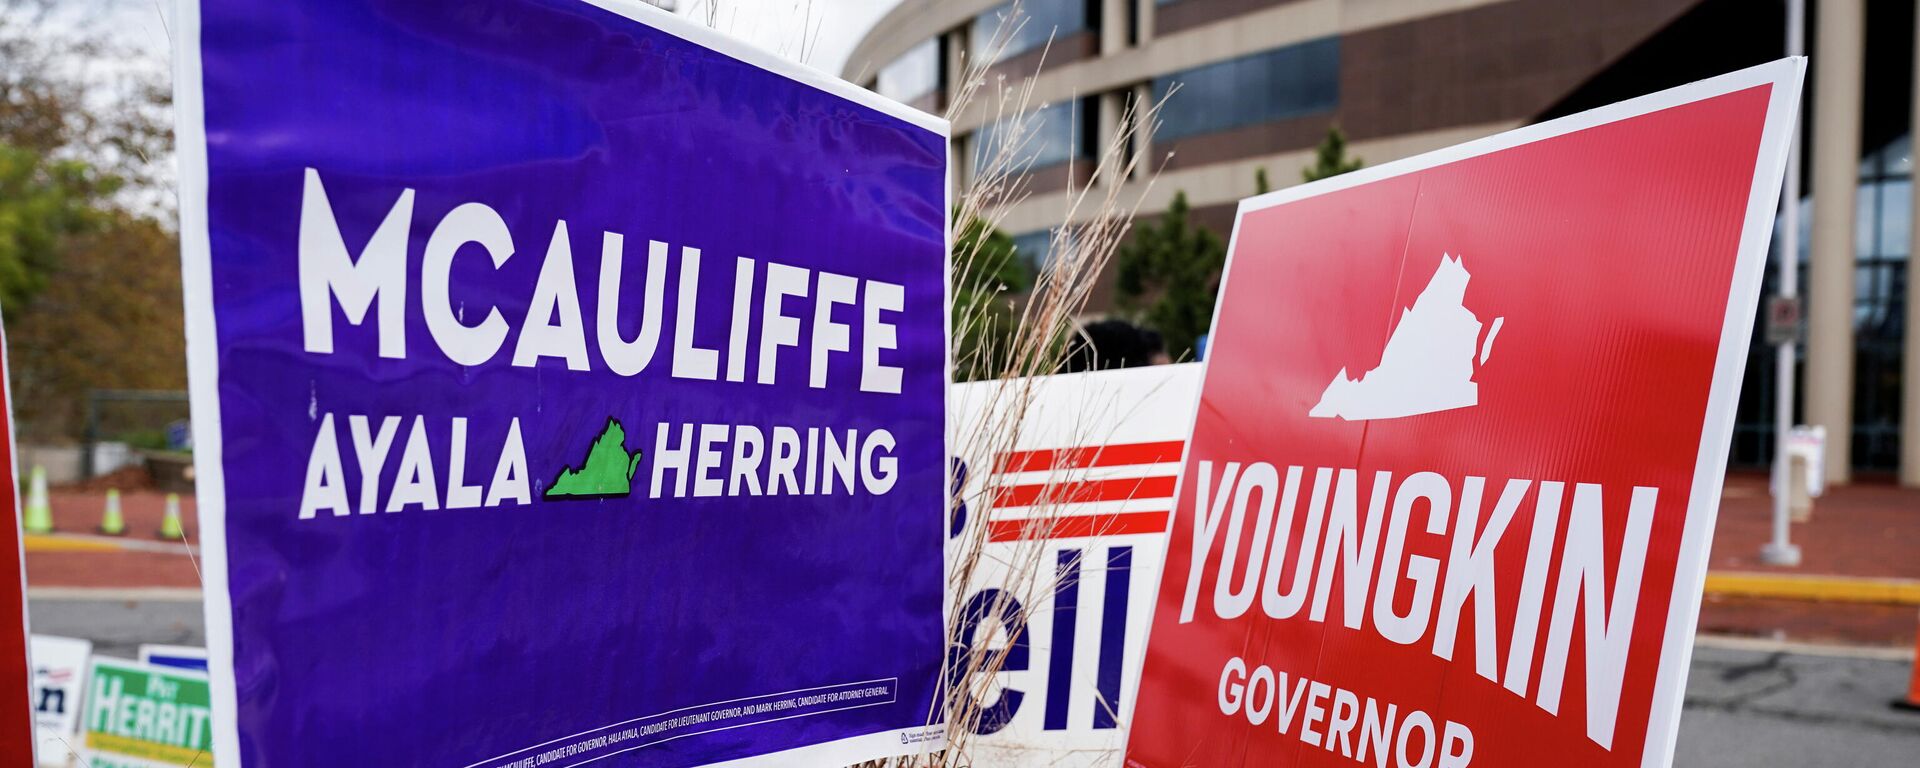 Campaign signs for Democrat Terry McAuliffe and Republican Glenn Youngkin stand together on the last day of early voting in the Virginia gubernatorial election in Fairfax, Virginia, U.S., October 30, 2021.   - Sputnik International, 1920, 02.11.2021